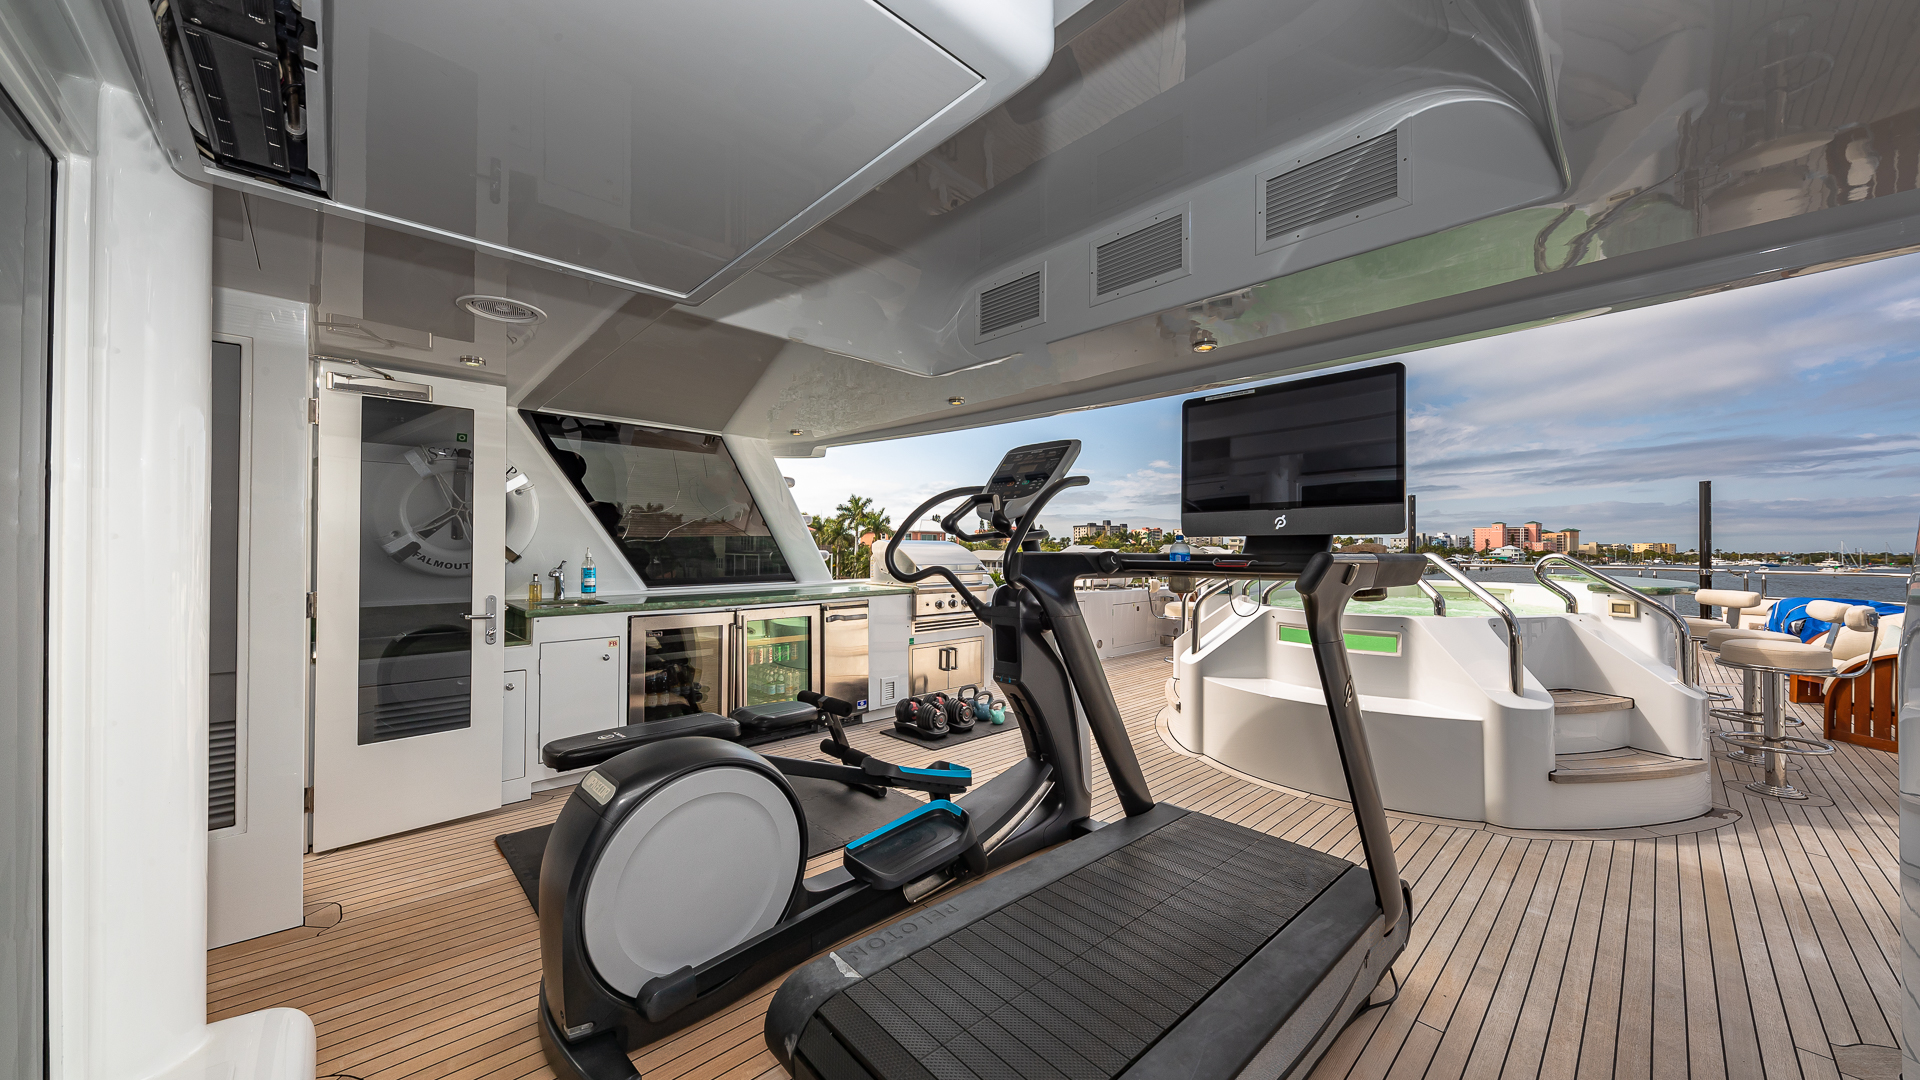 Sun Deck Gym And Jacuzzi